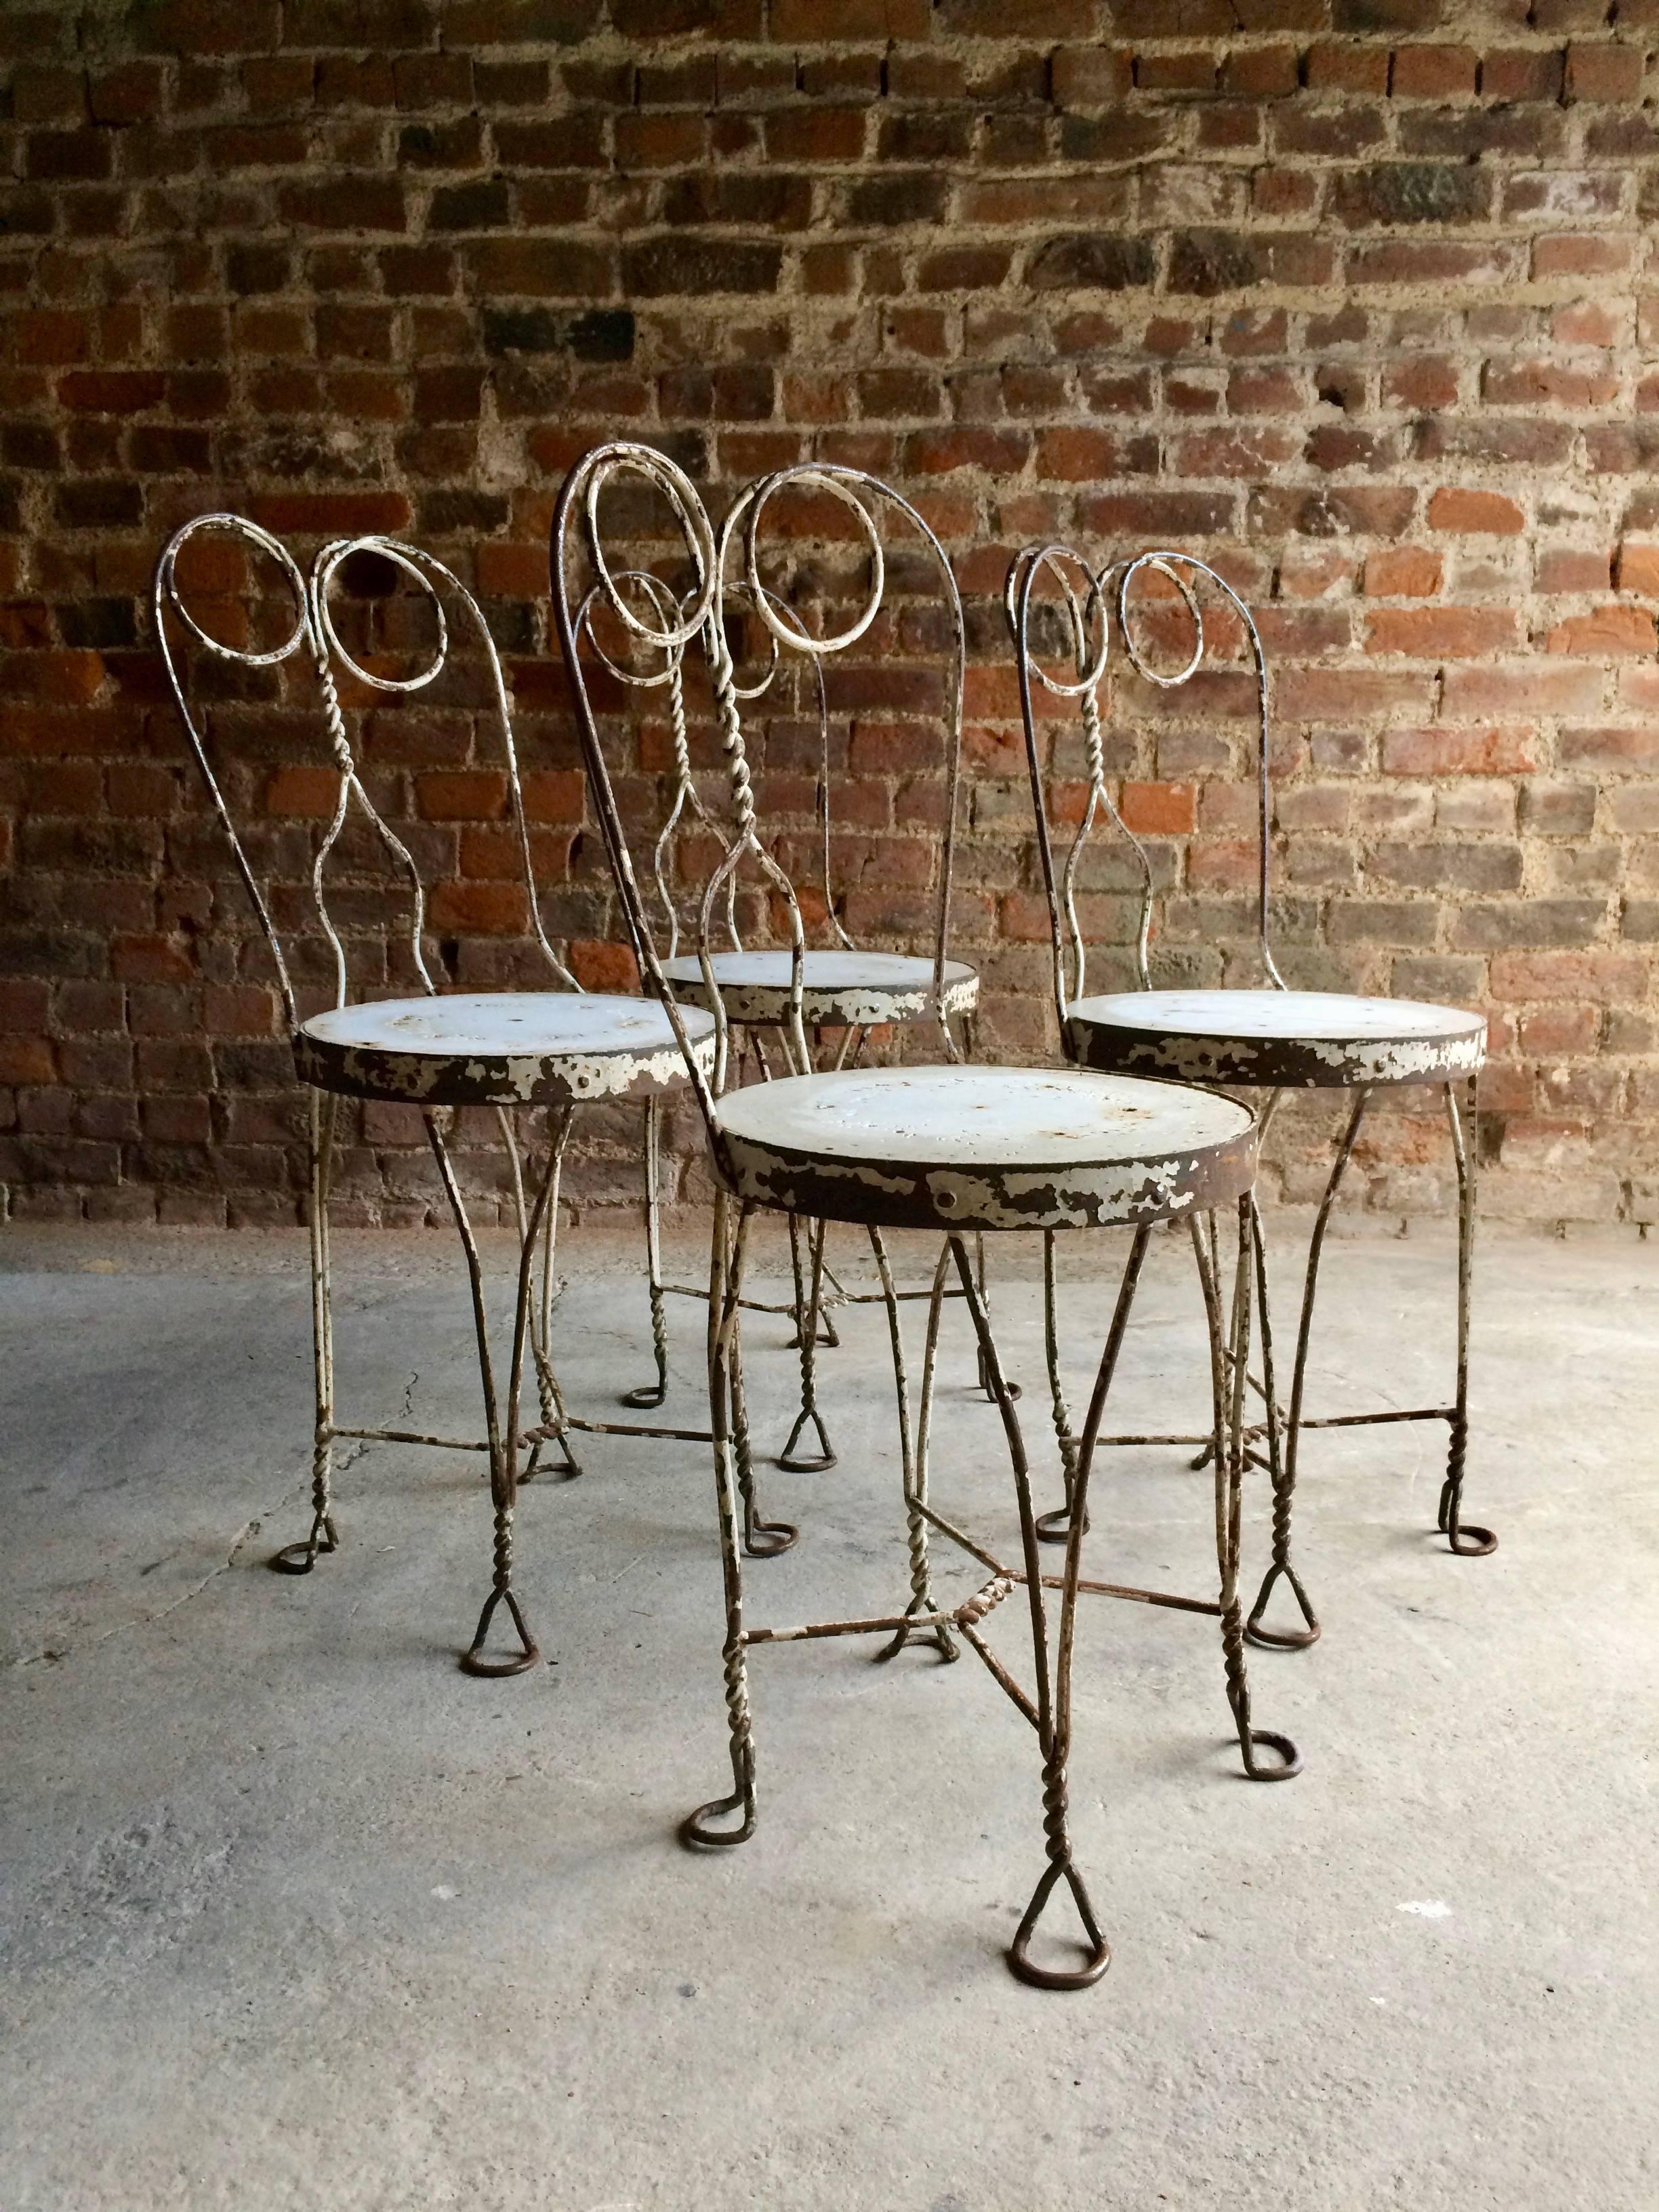 A magnificent early 20th century original French bistro table with four matching chairs circa 1920s, the steel circular table with heavy patination allover with four matching scrolling wrought iron chairs again with heavy patination allover, the set